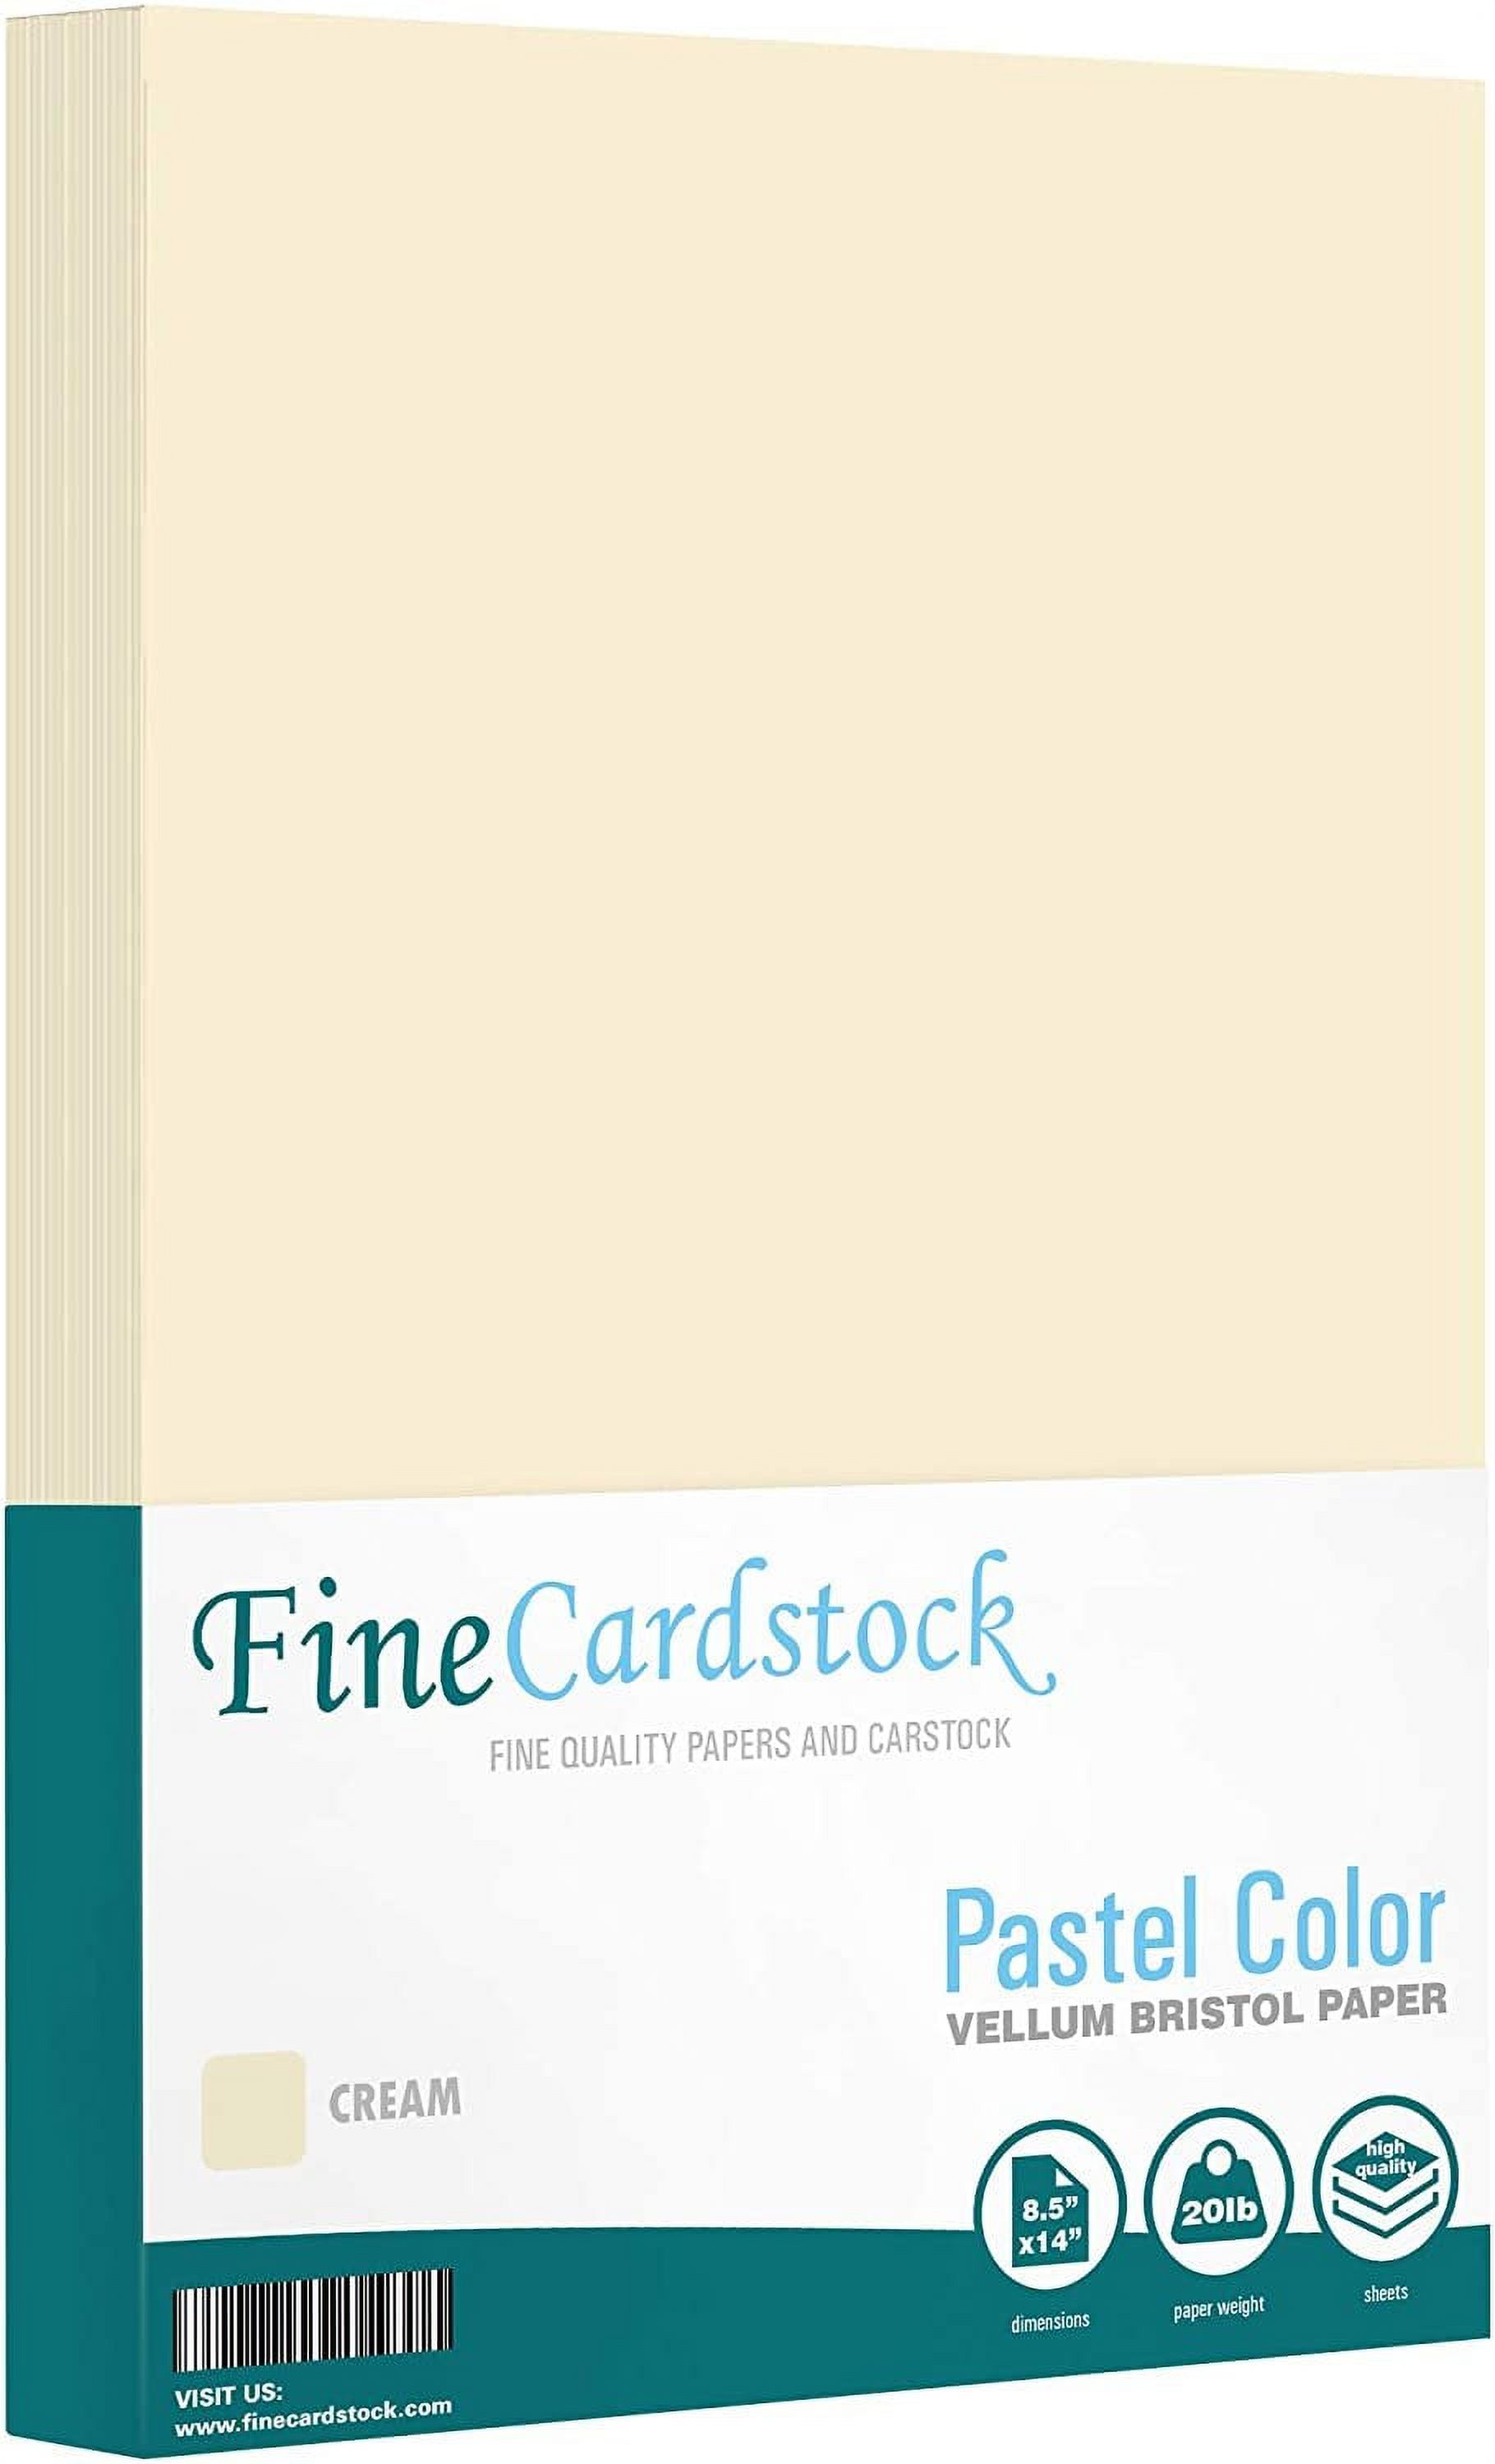 8.5 x 14” Pastel Color Paper – Great for Cards and Stationery Printing | Legal, Menu Size | Lightweight 20lb Paper | 100 Sheets | Cream - image 1 of 6